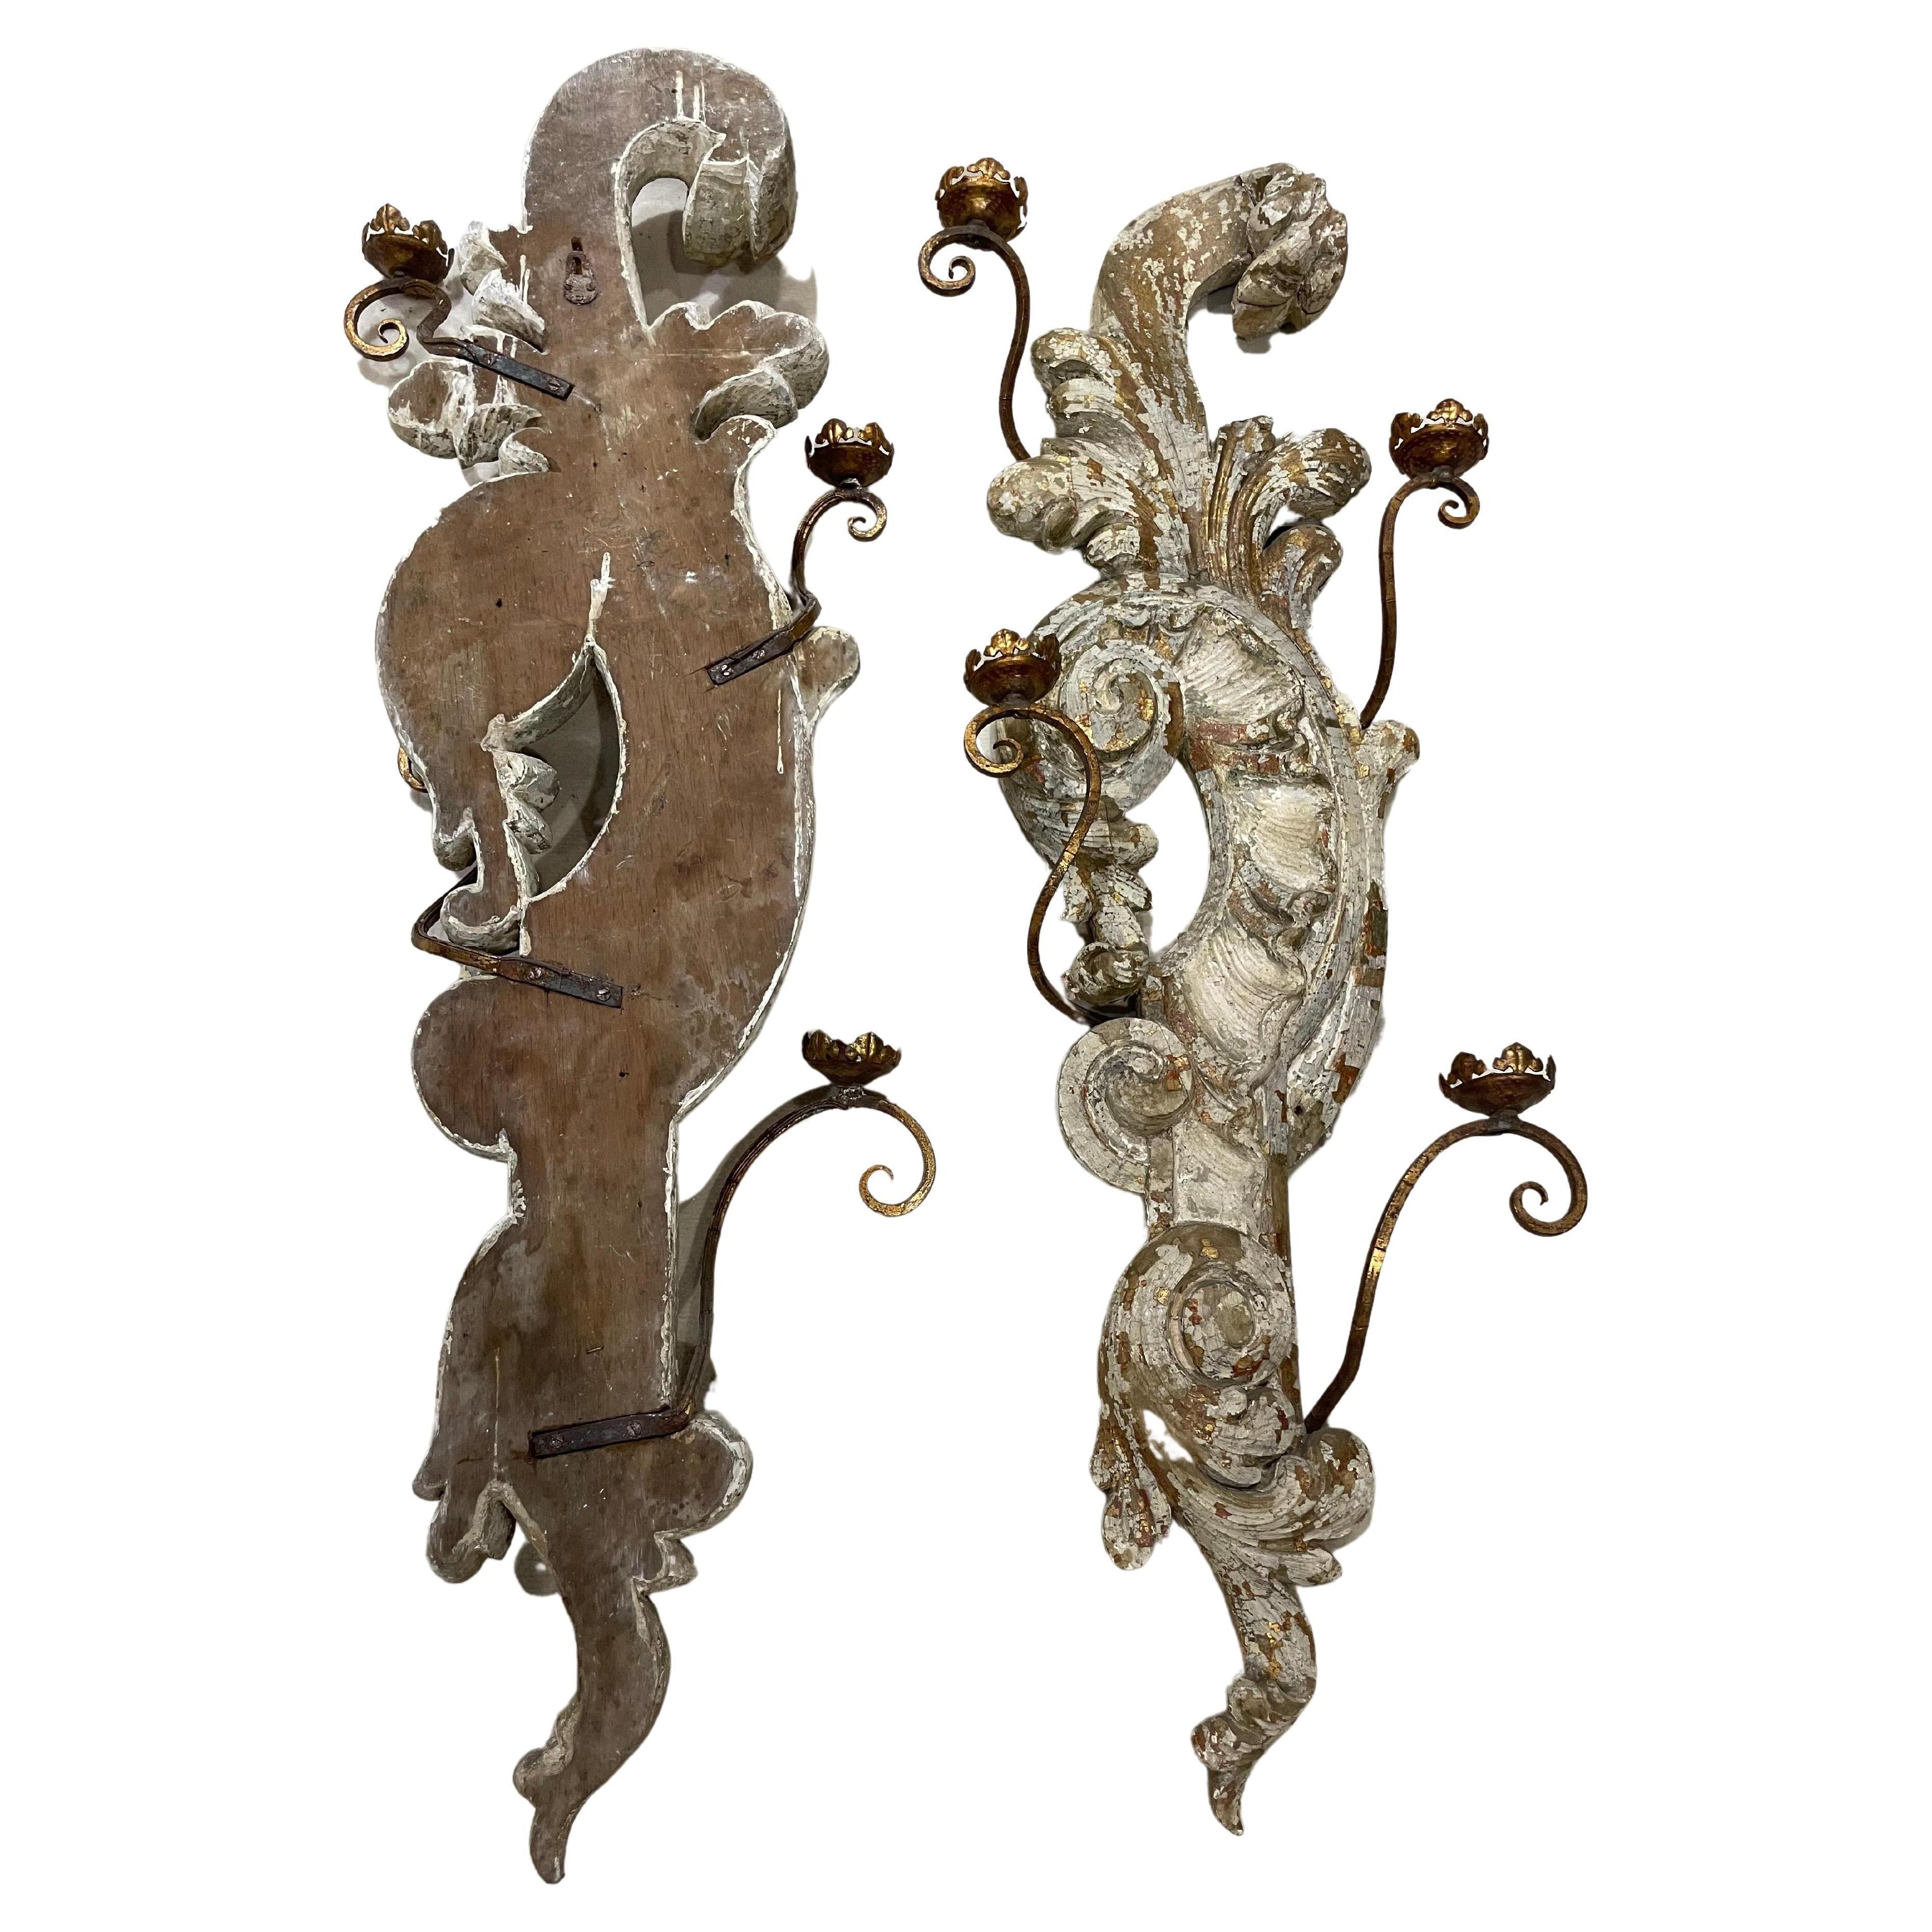 Spectacular and masives pair of wooden wall lamp has decorated with carved acanthus leaves with four arms of lights. The patina of time is superb, indeed the colors white, natural wood, golden and cracked gives a romantic and timeless tone to these